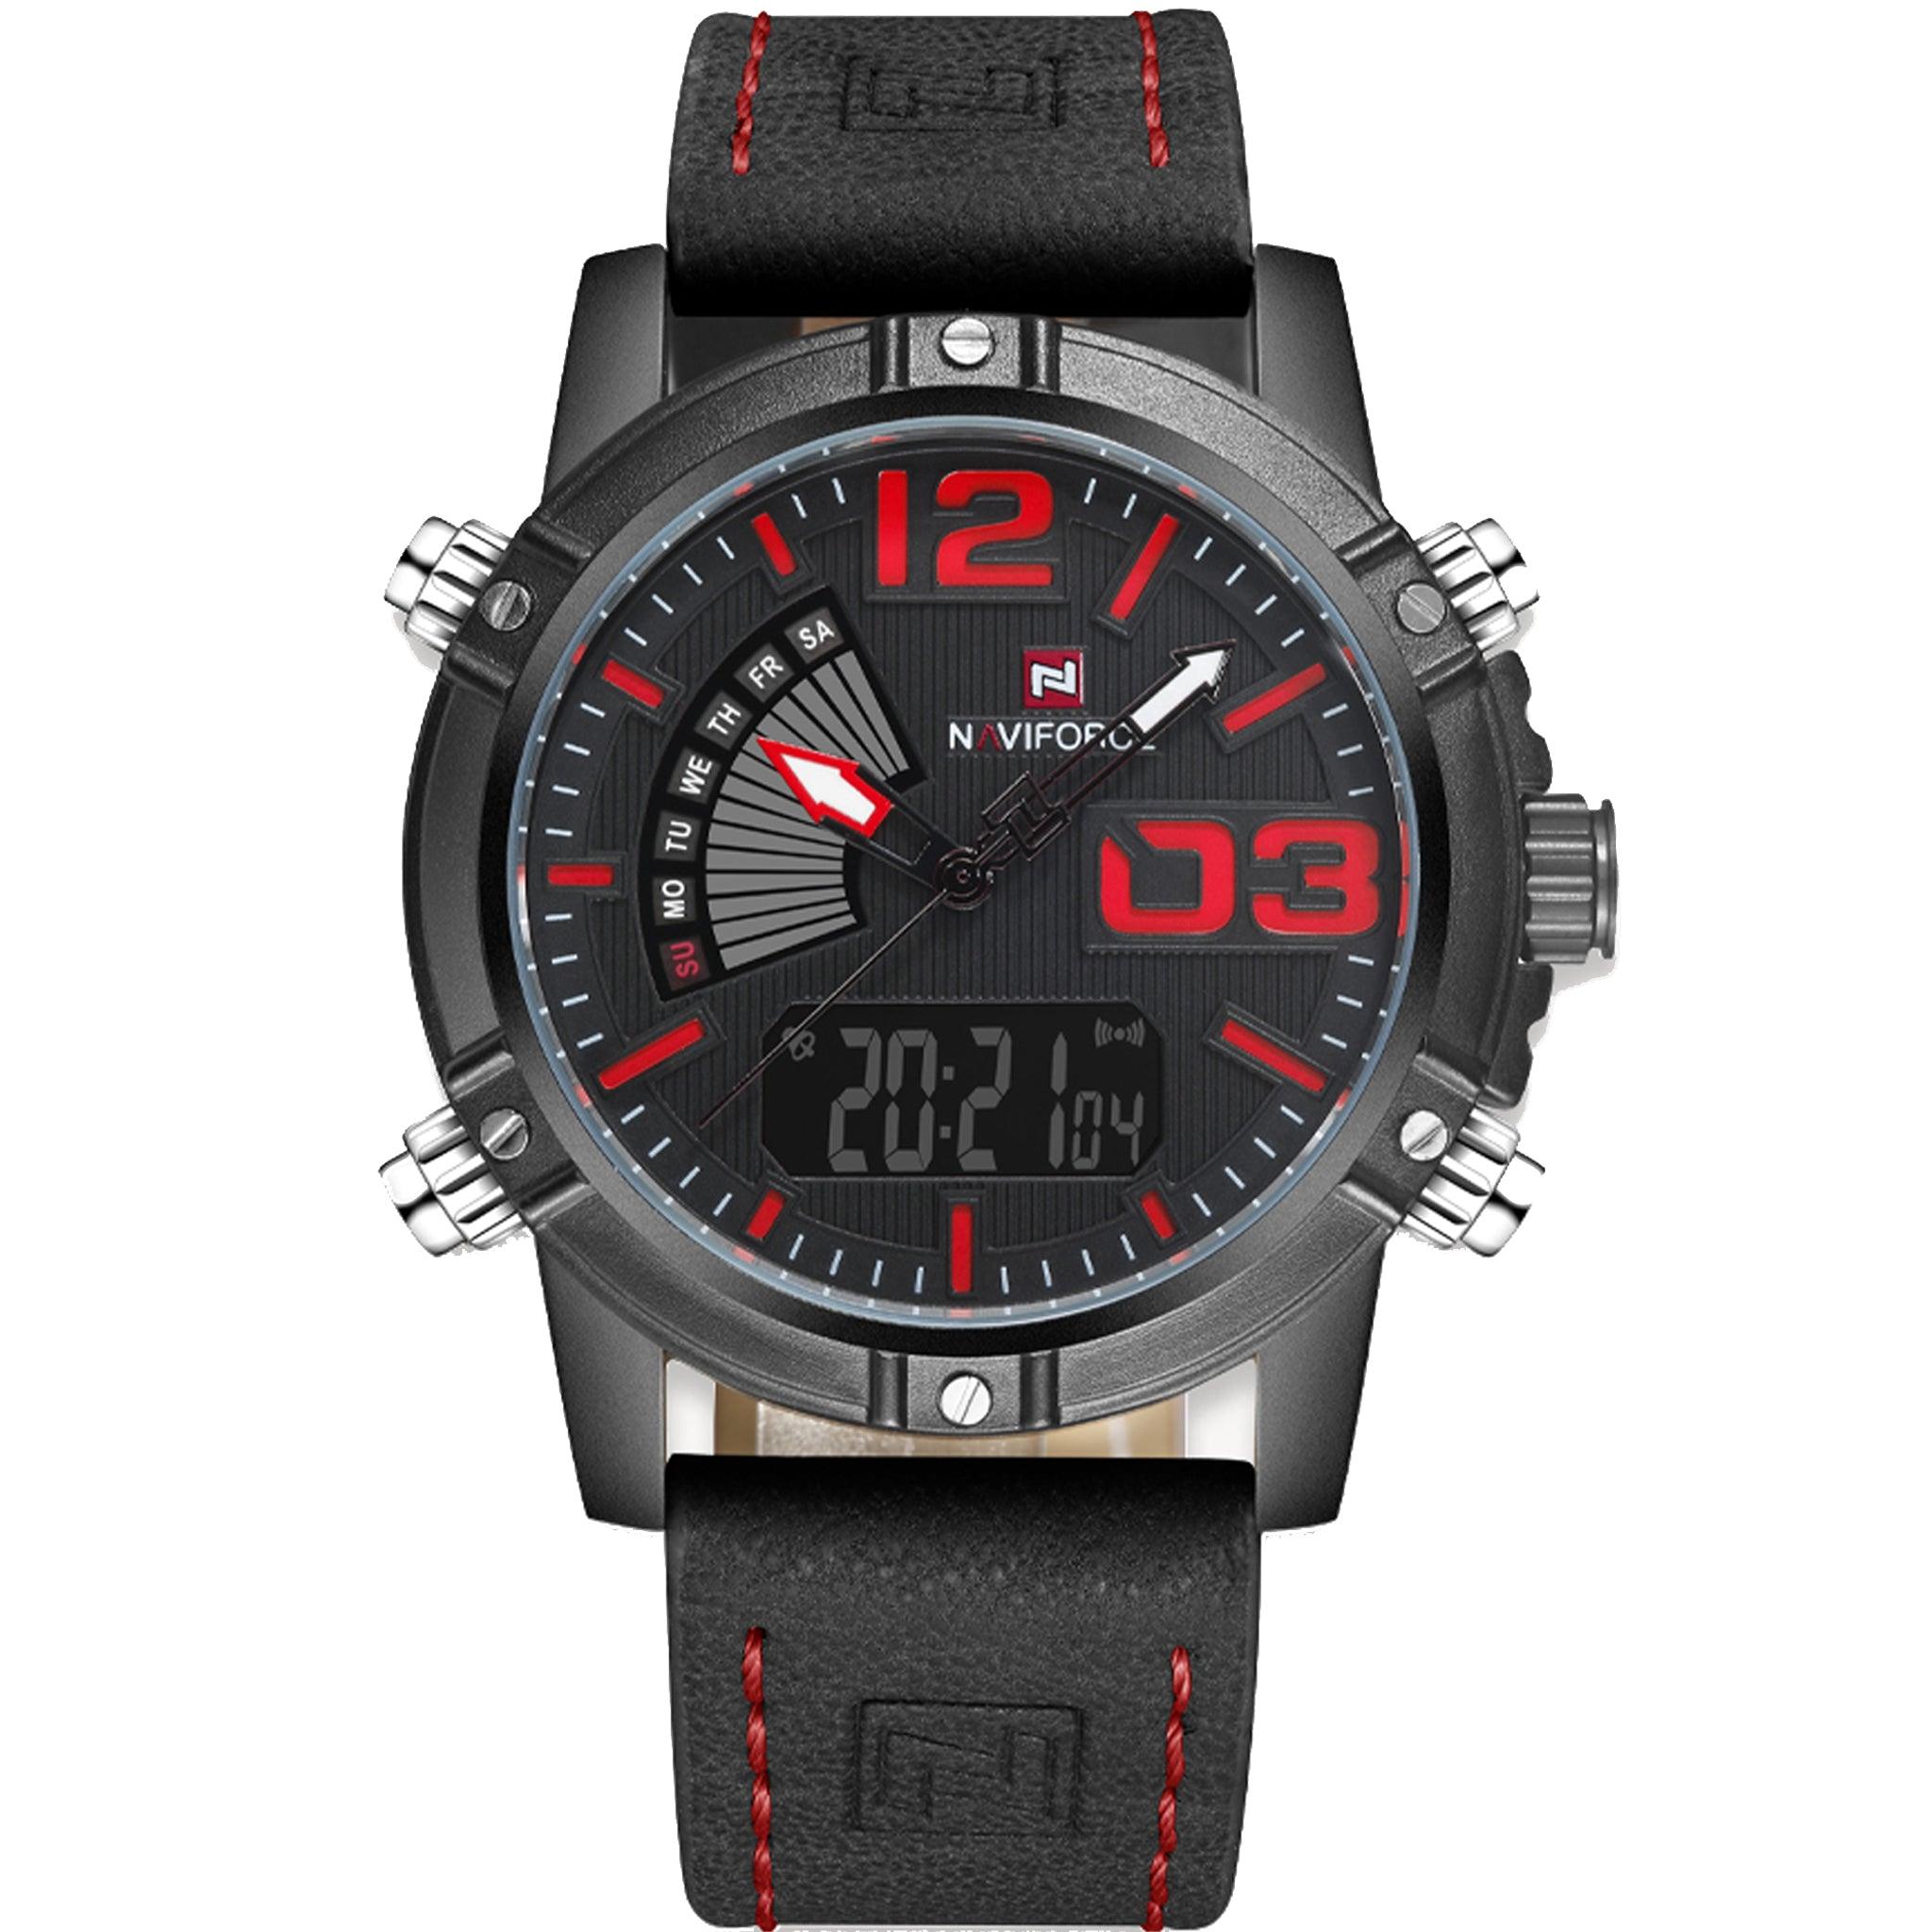 Naviforce Nf9095 Sport Military Luxury Analog-Digital Black Leather Wristwatch Casual For Men, With Dual Movt Calendar Led Light